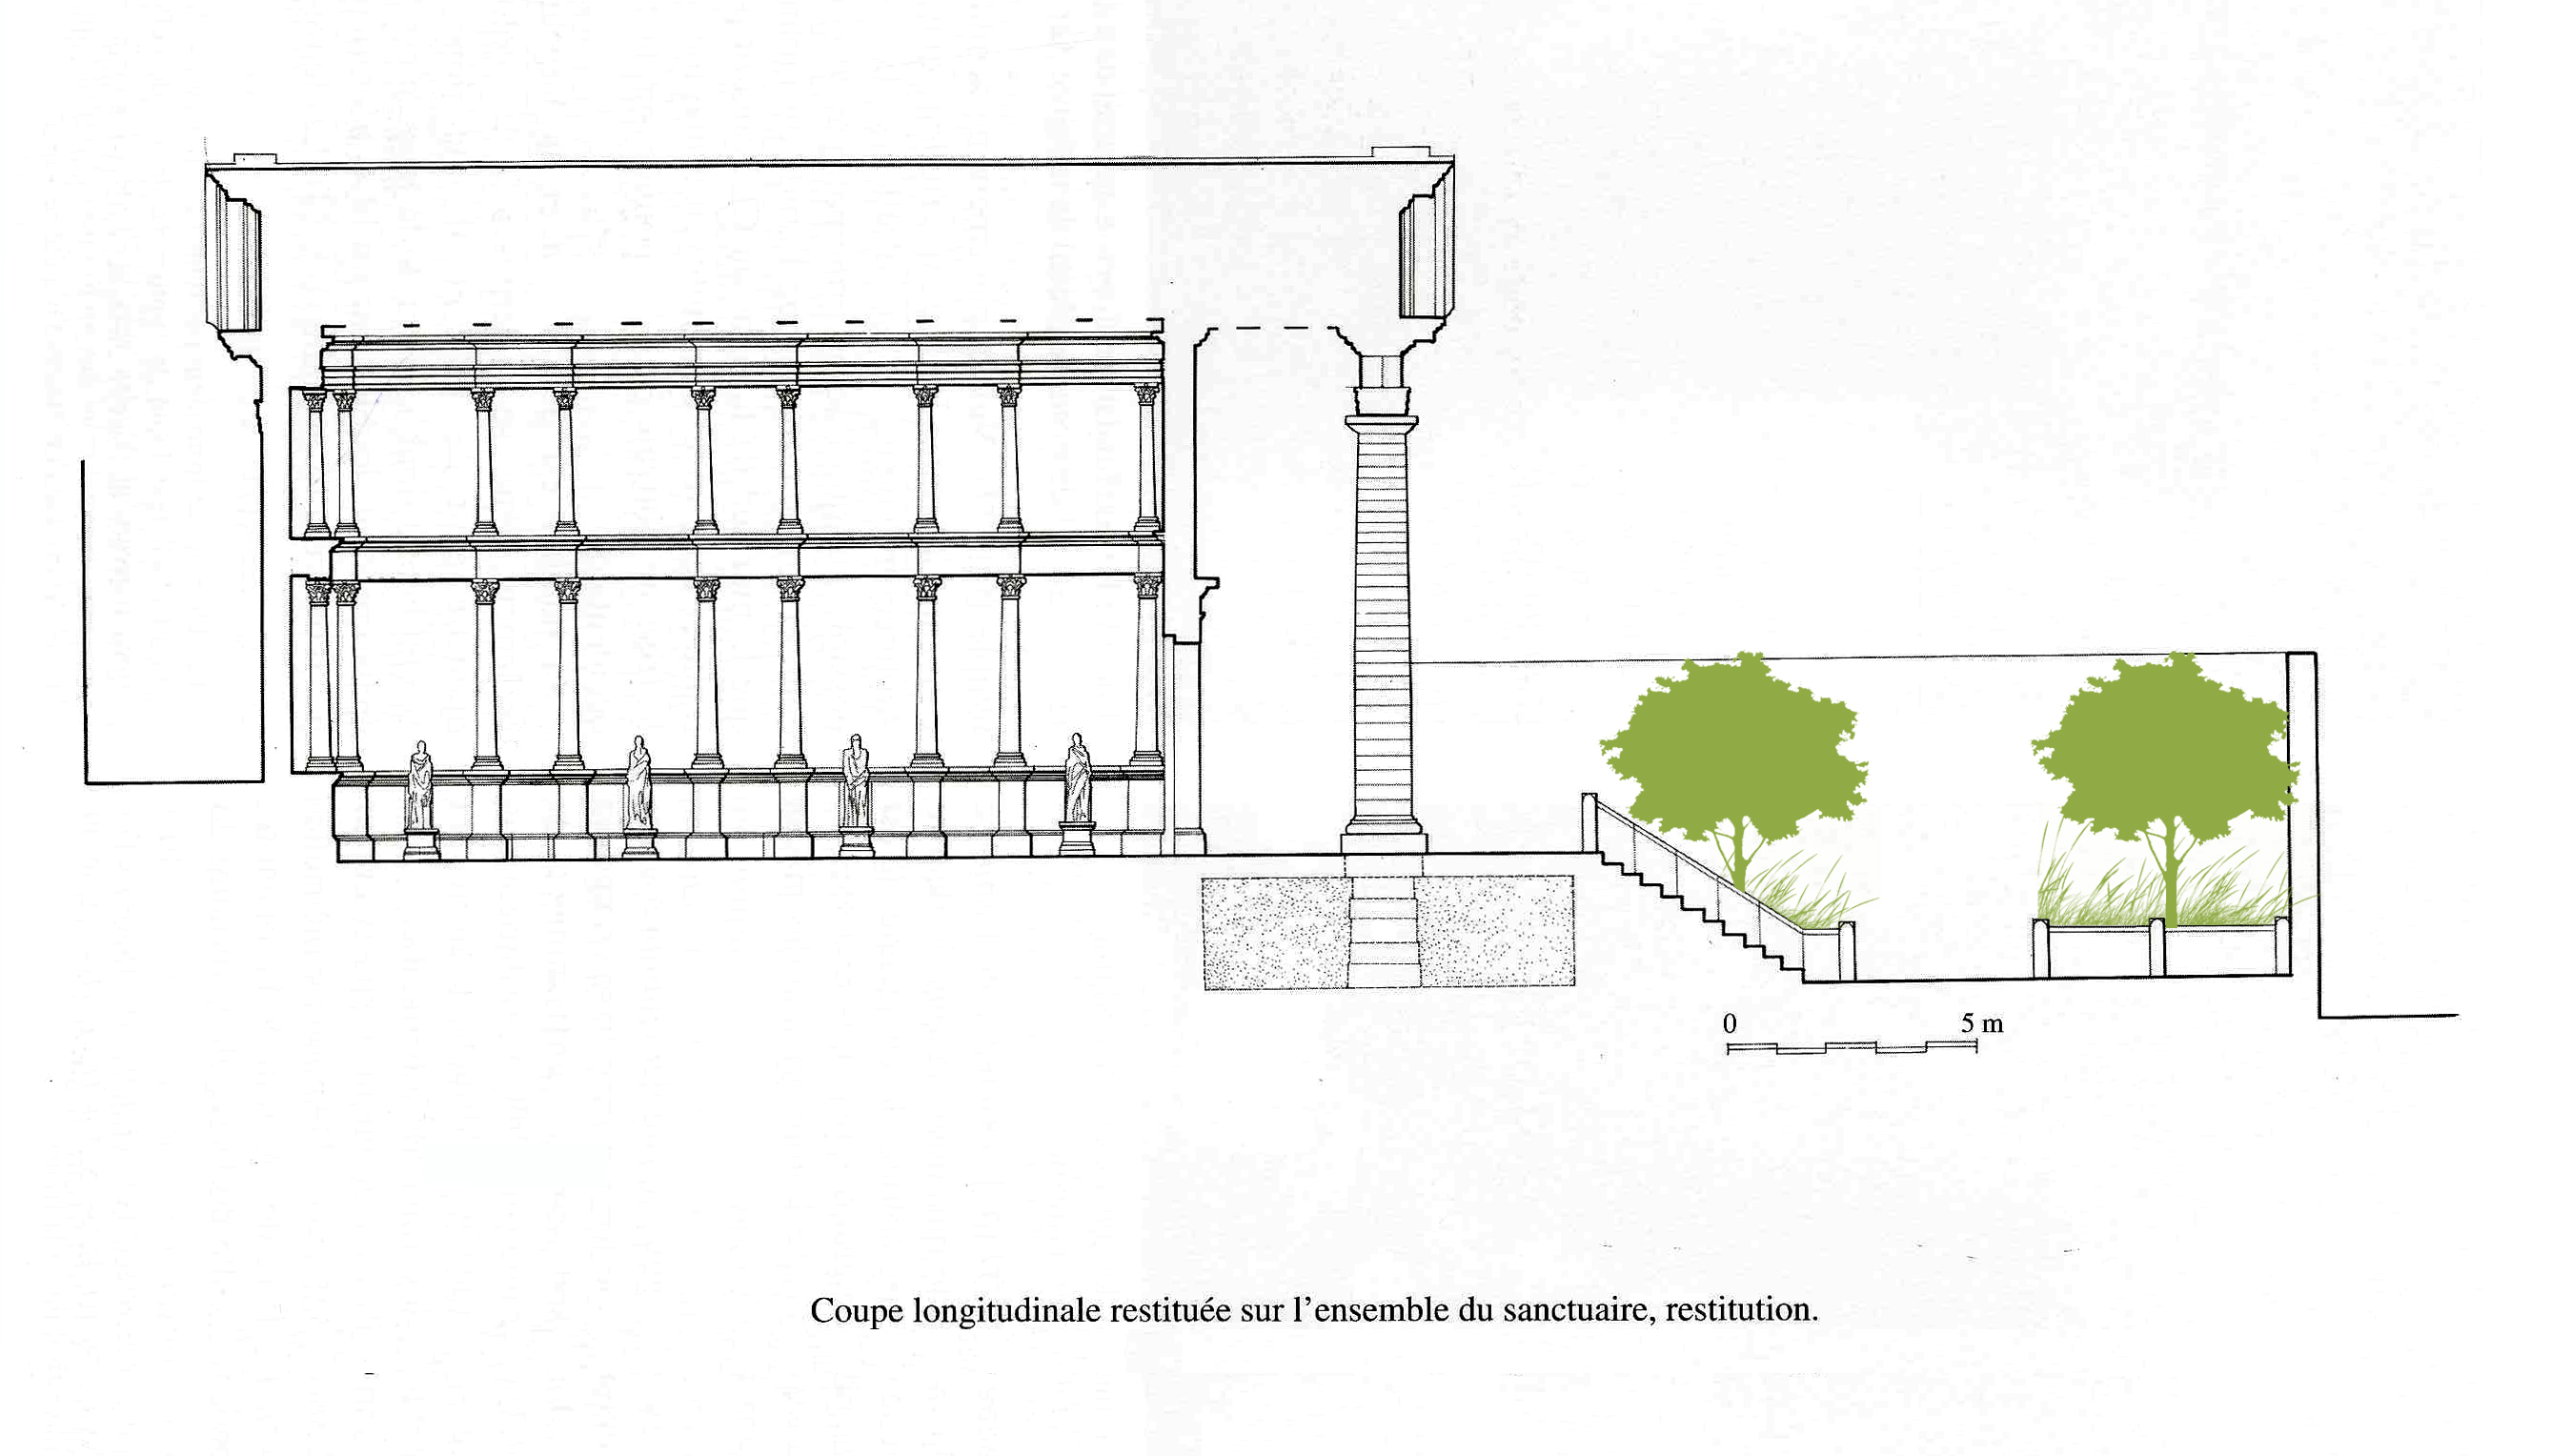 Cross section of the courtyard (B-B’)